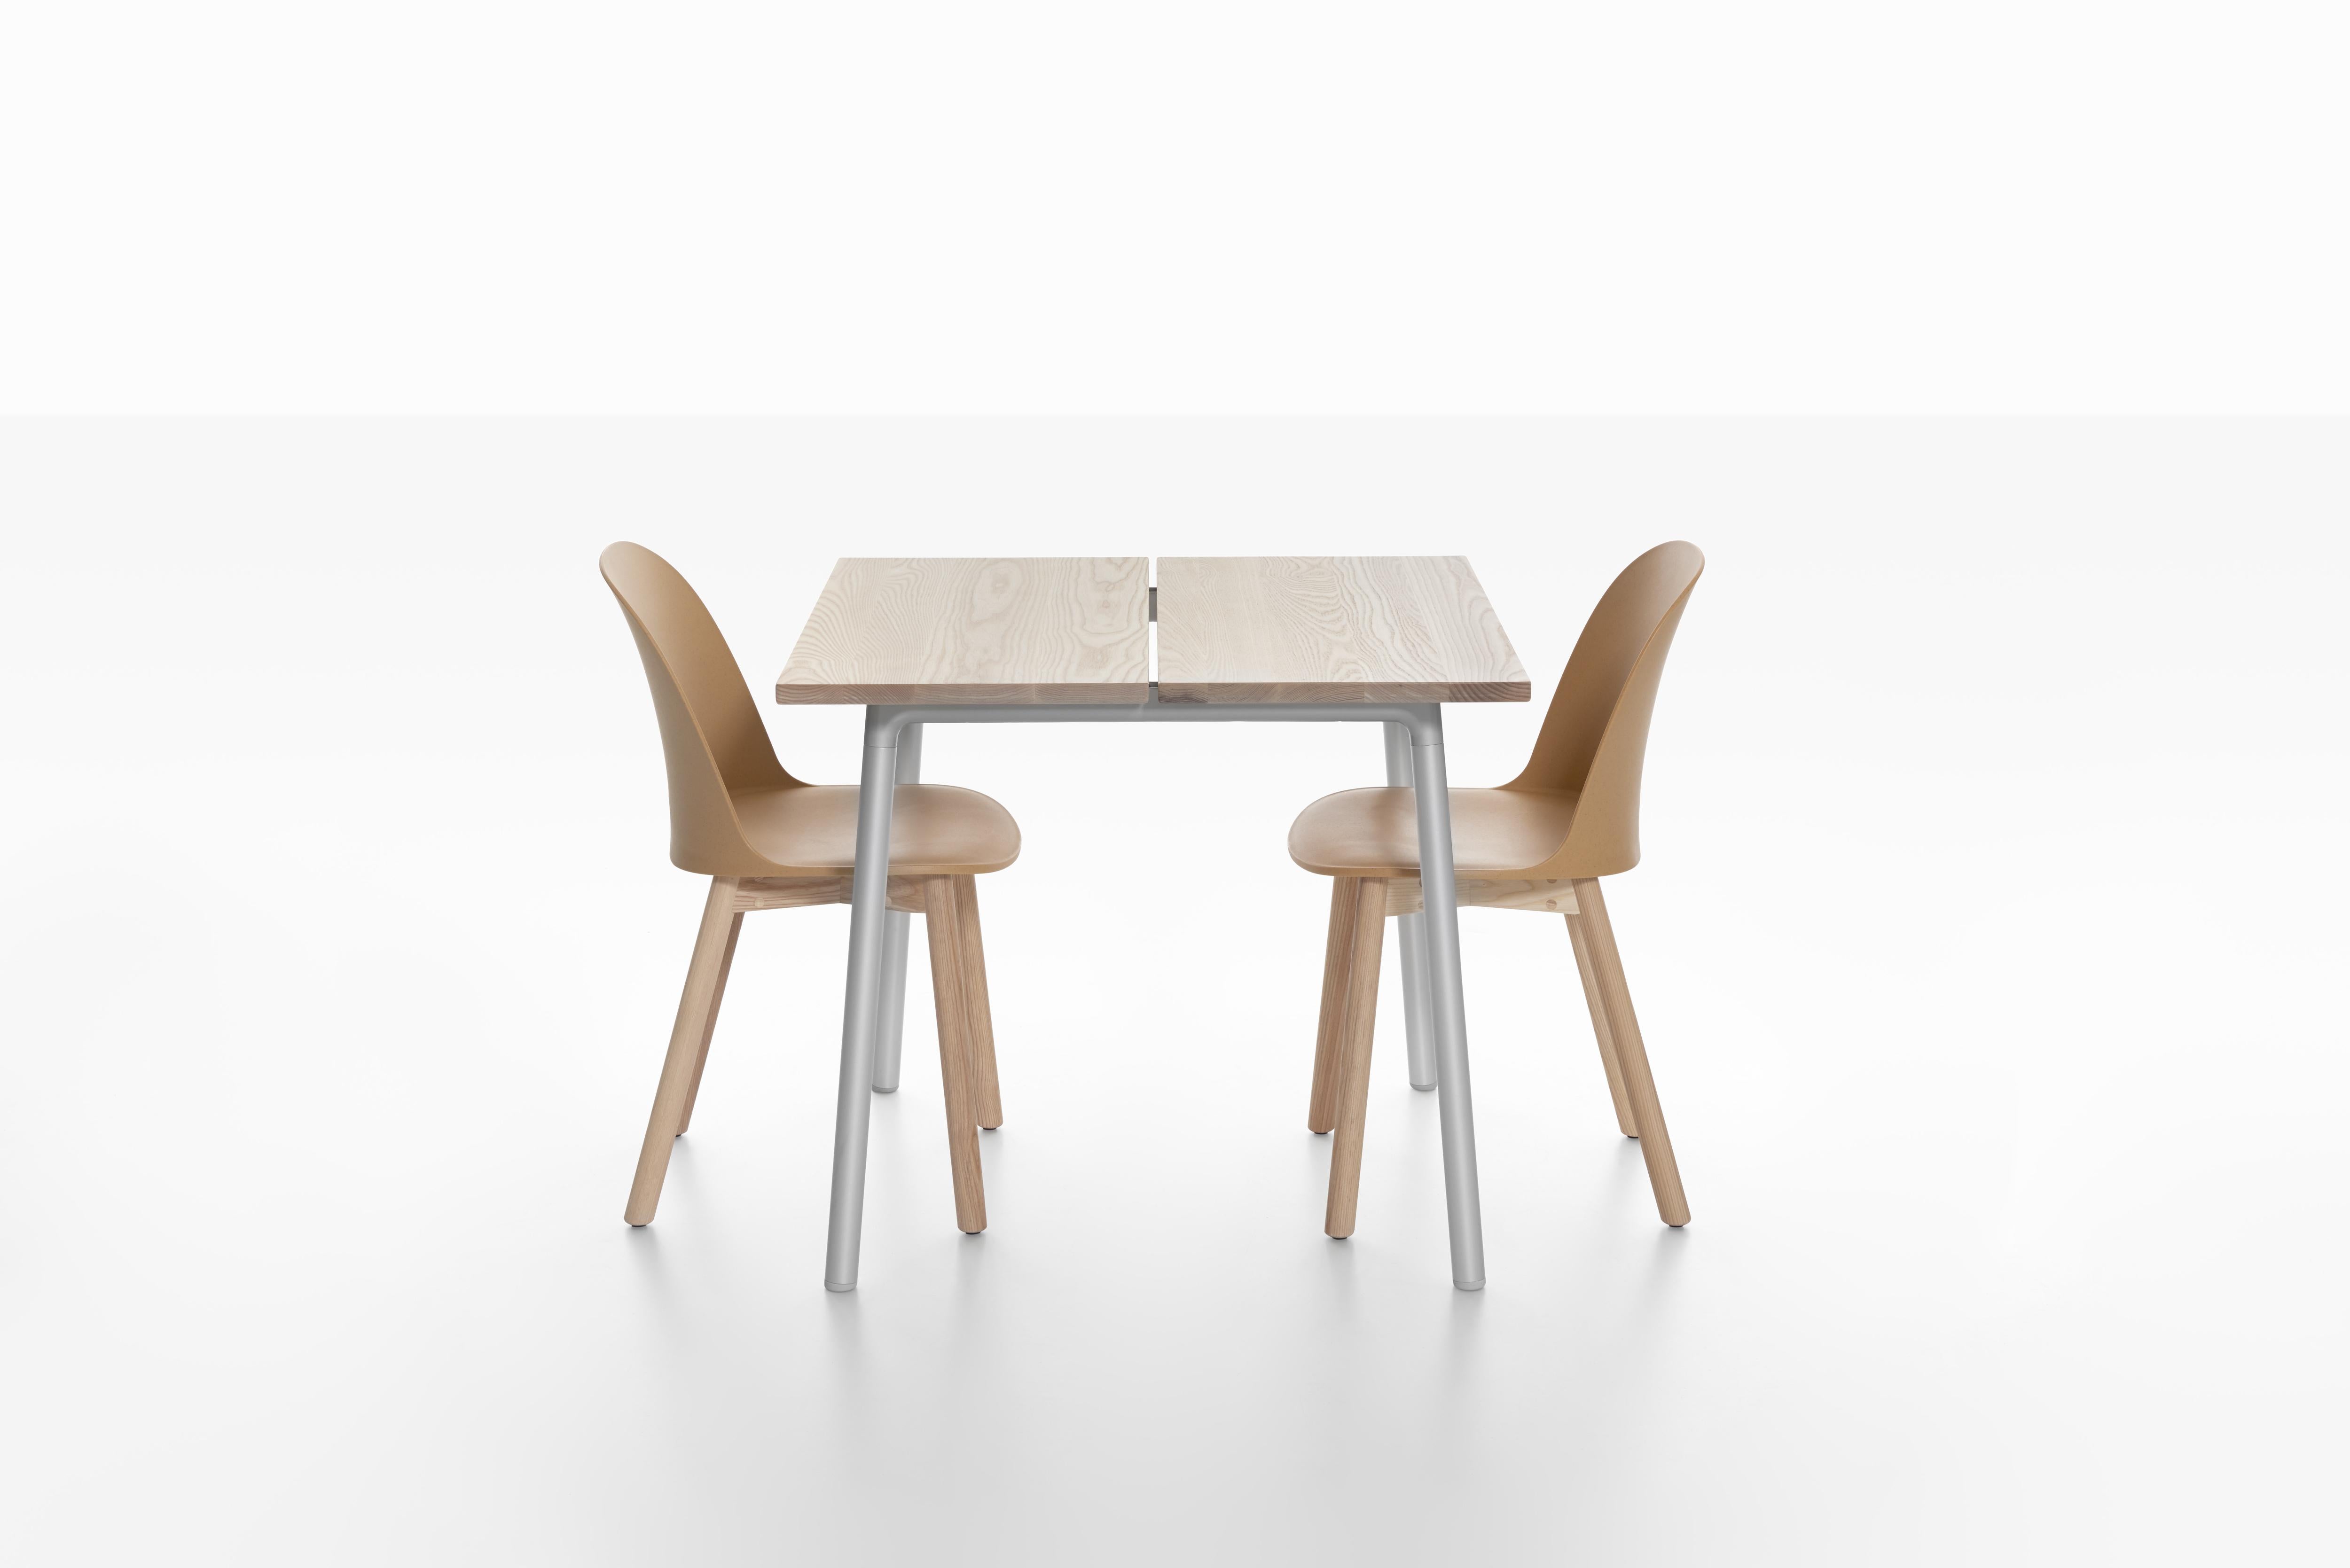 Emeco Run XL High Table in Clear Anodized Aluminum by Sam Hecht + Kim Colin In New Condition For Sale In Hanover, PA